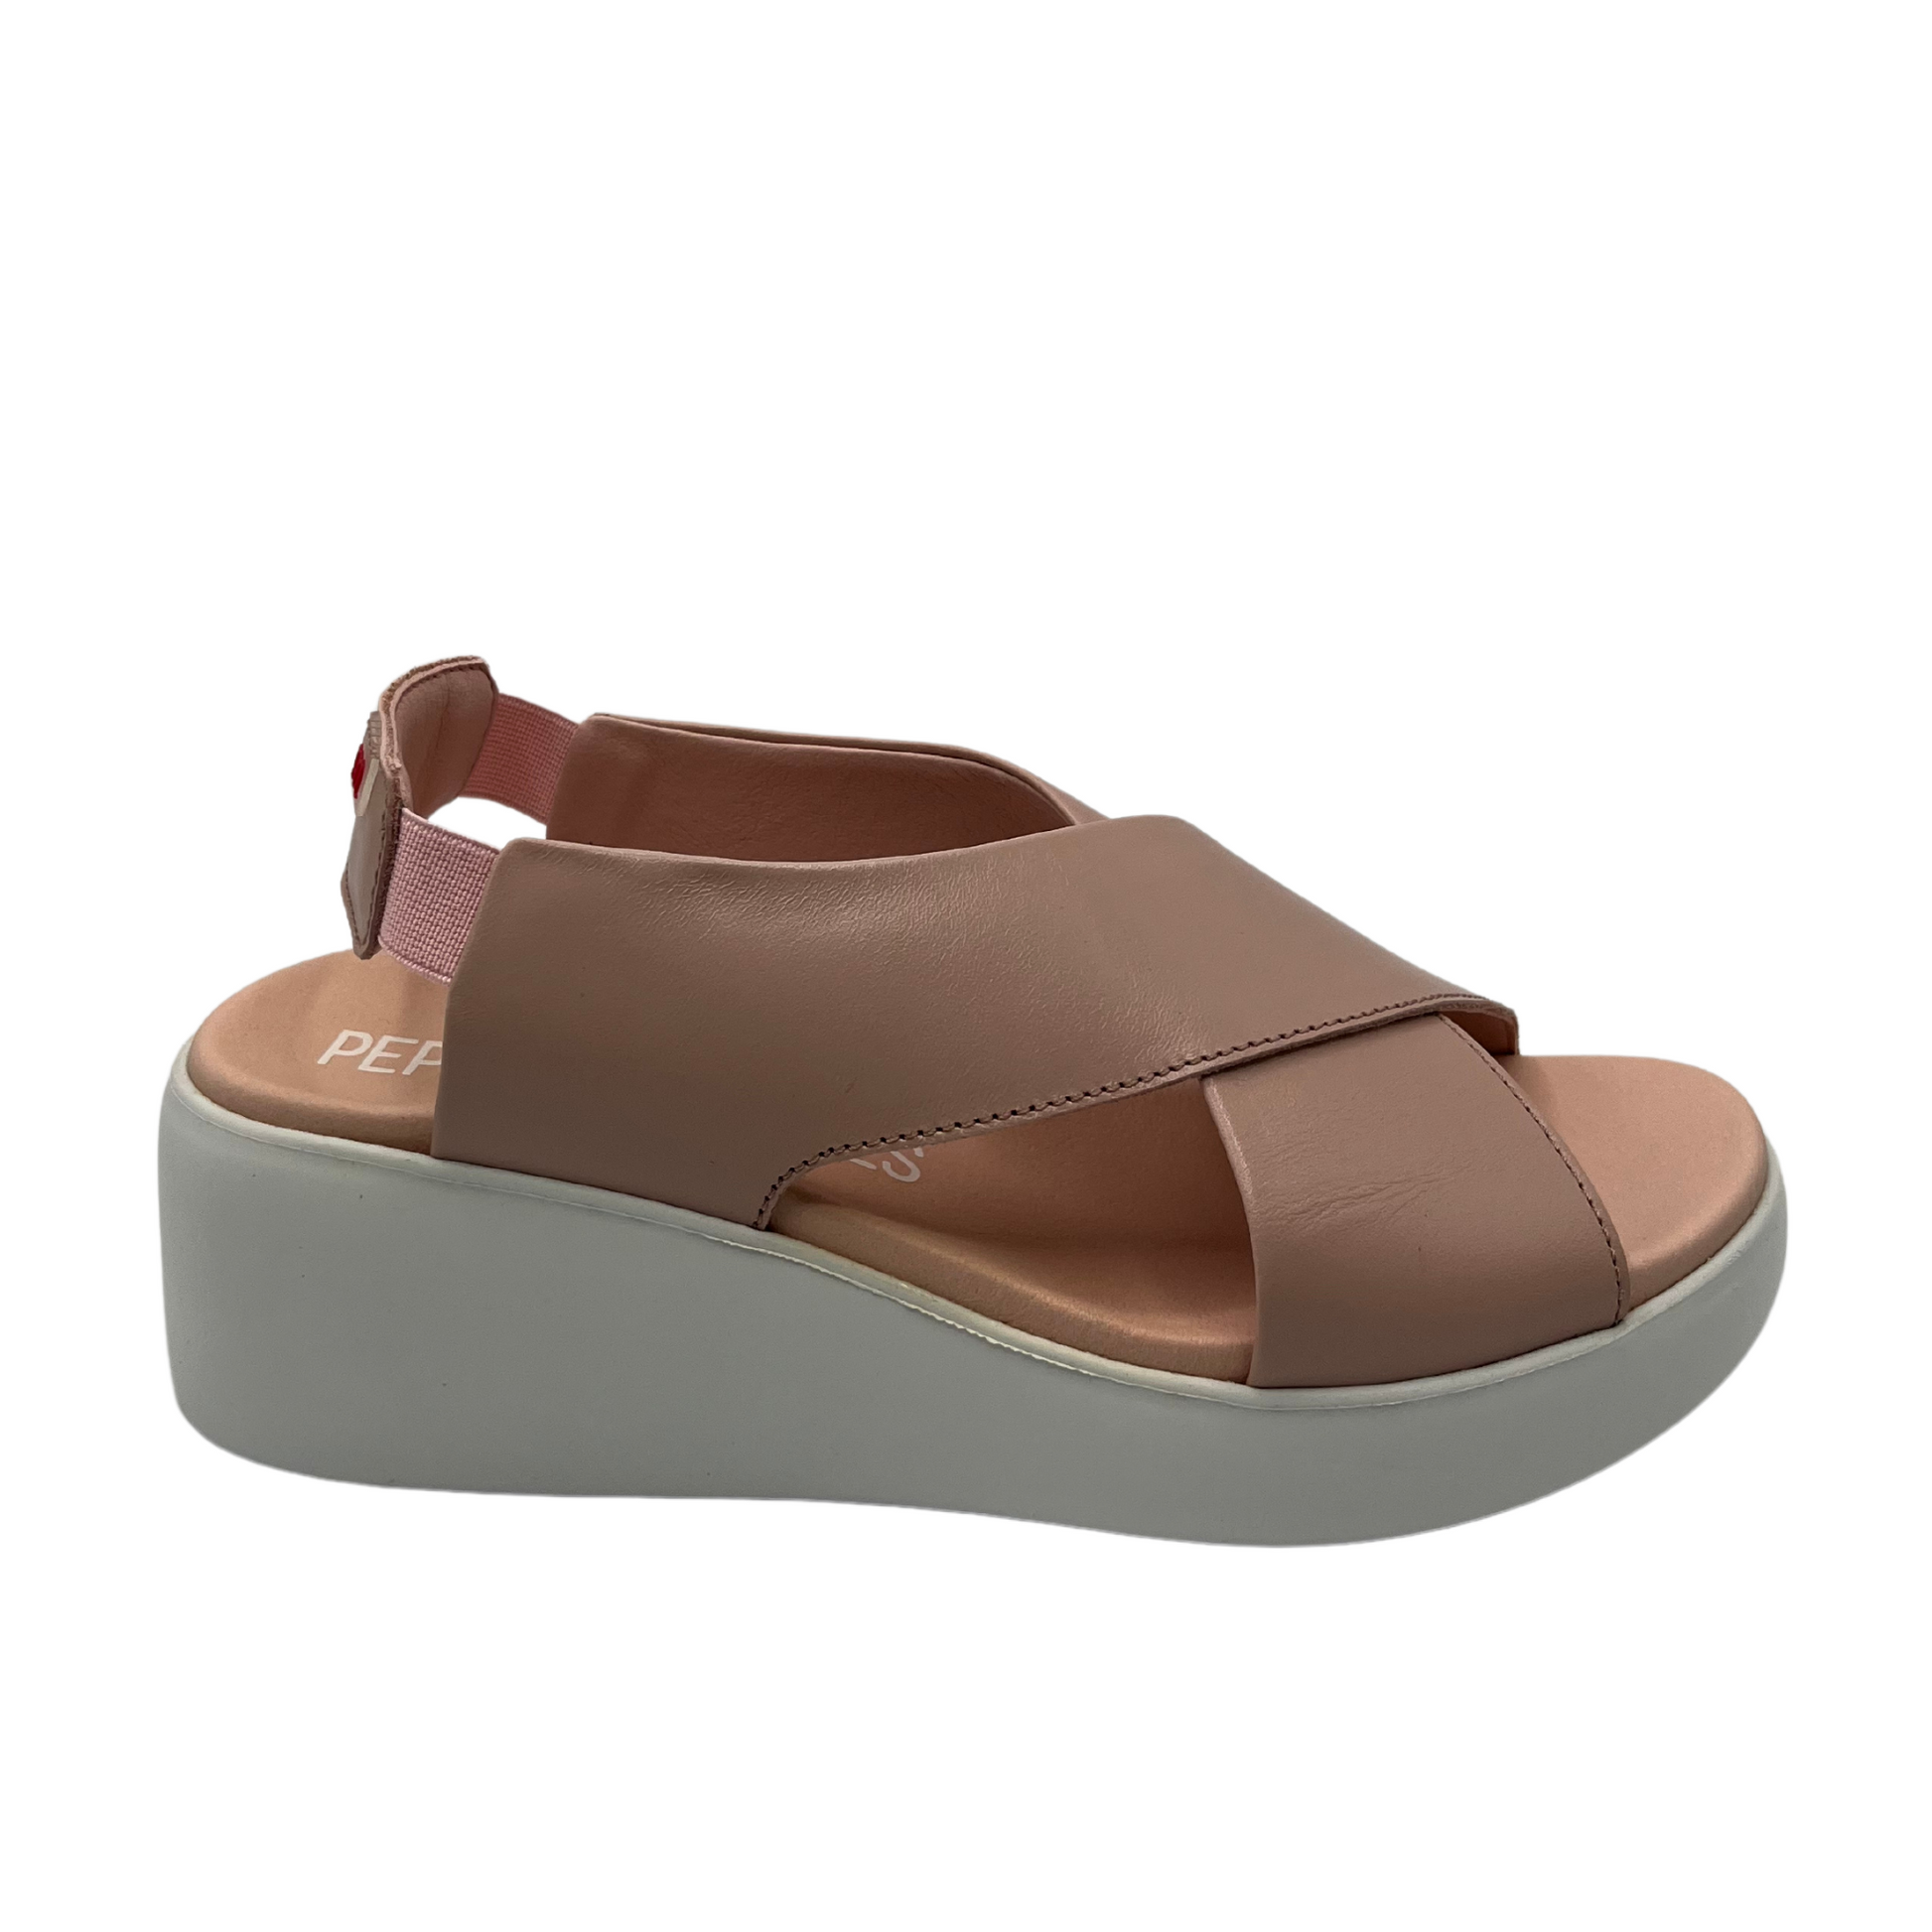 Right facing view of leather wedge shoe with criss cross straps and elastic slingback strap